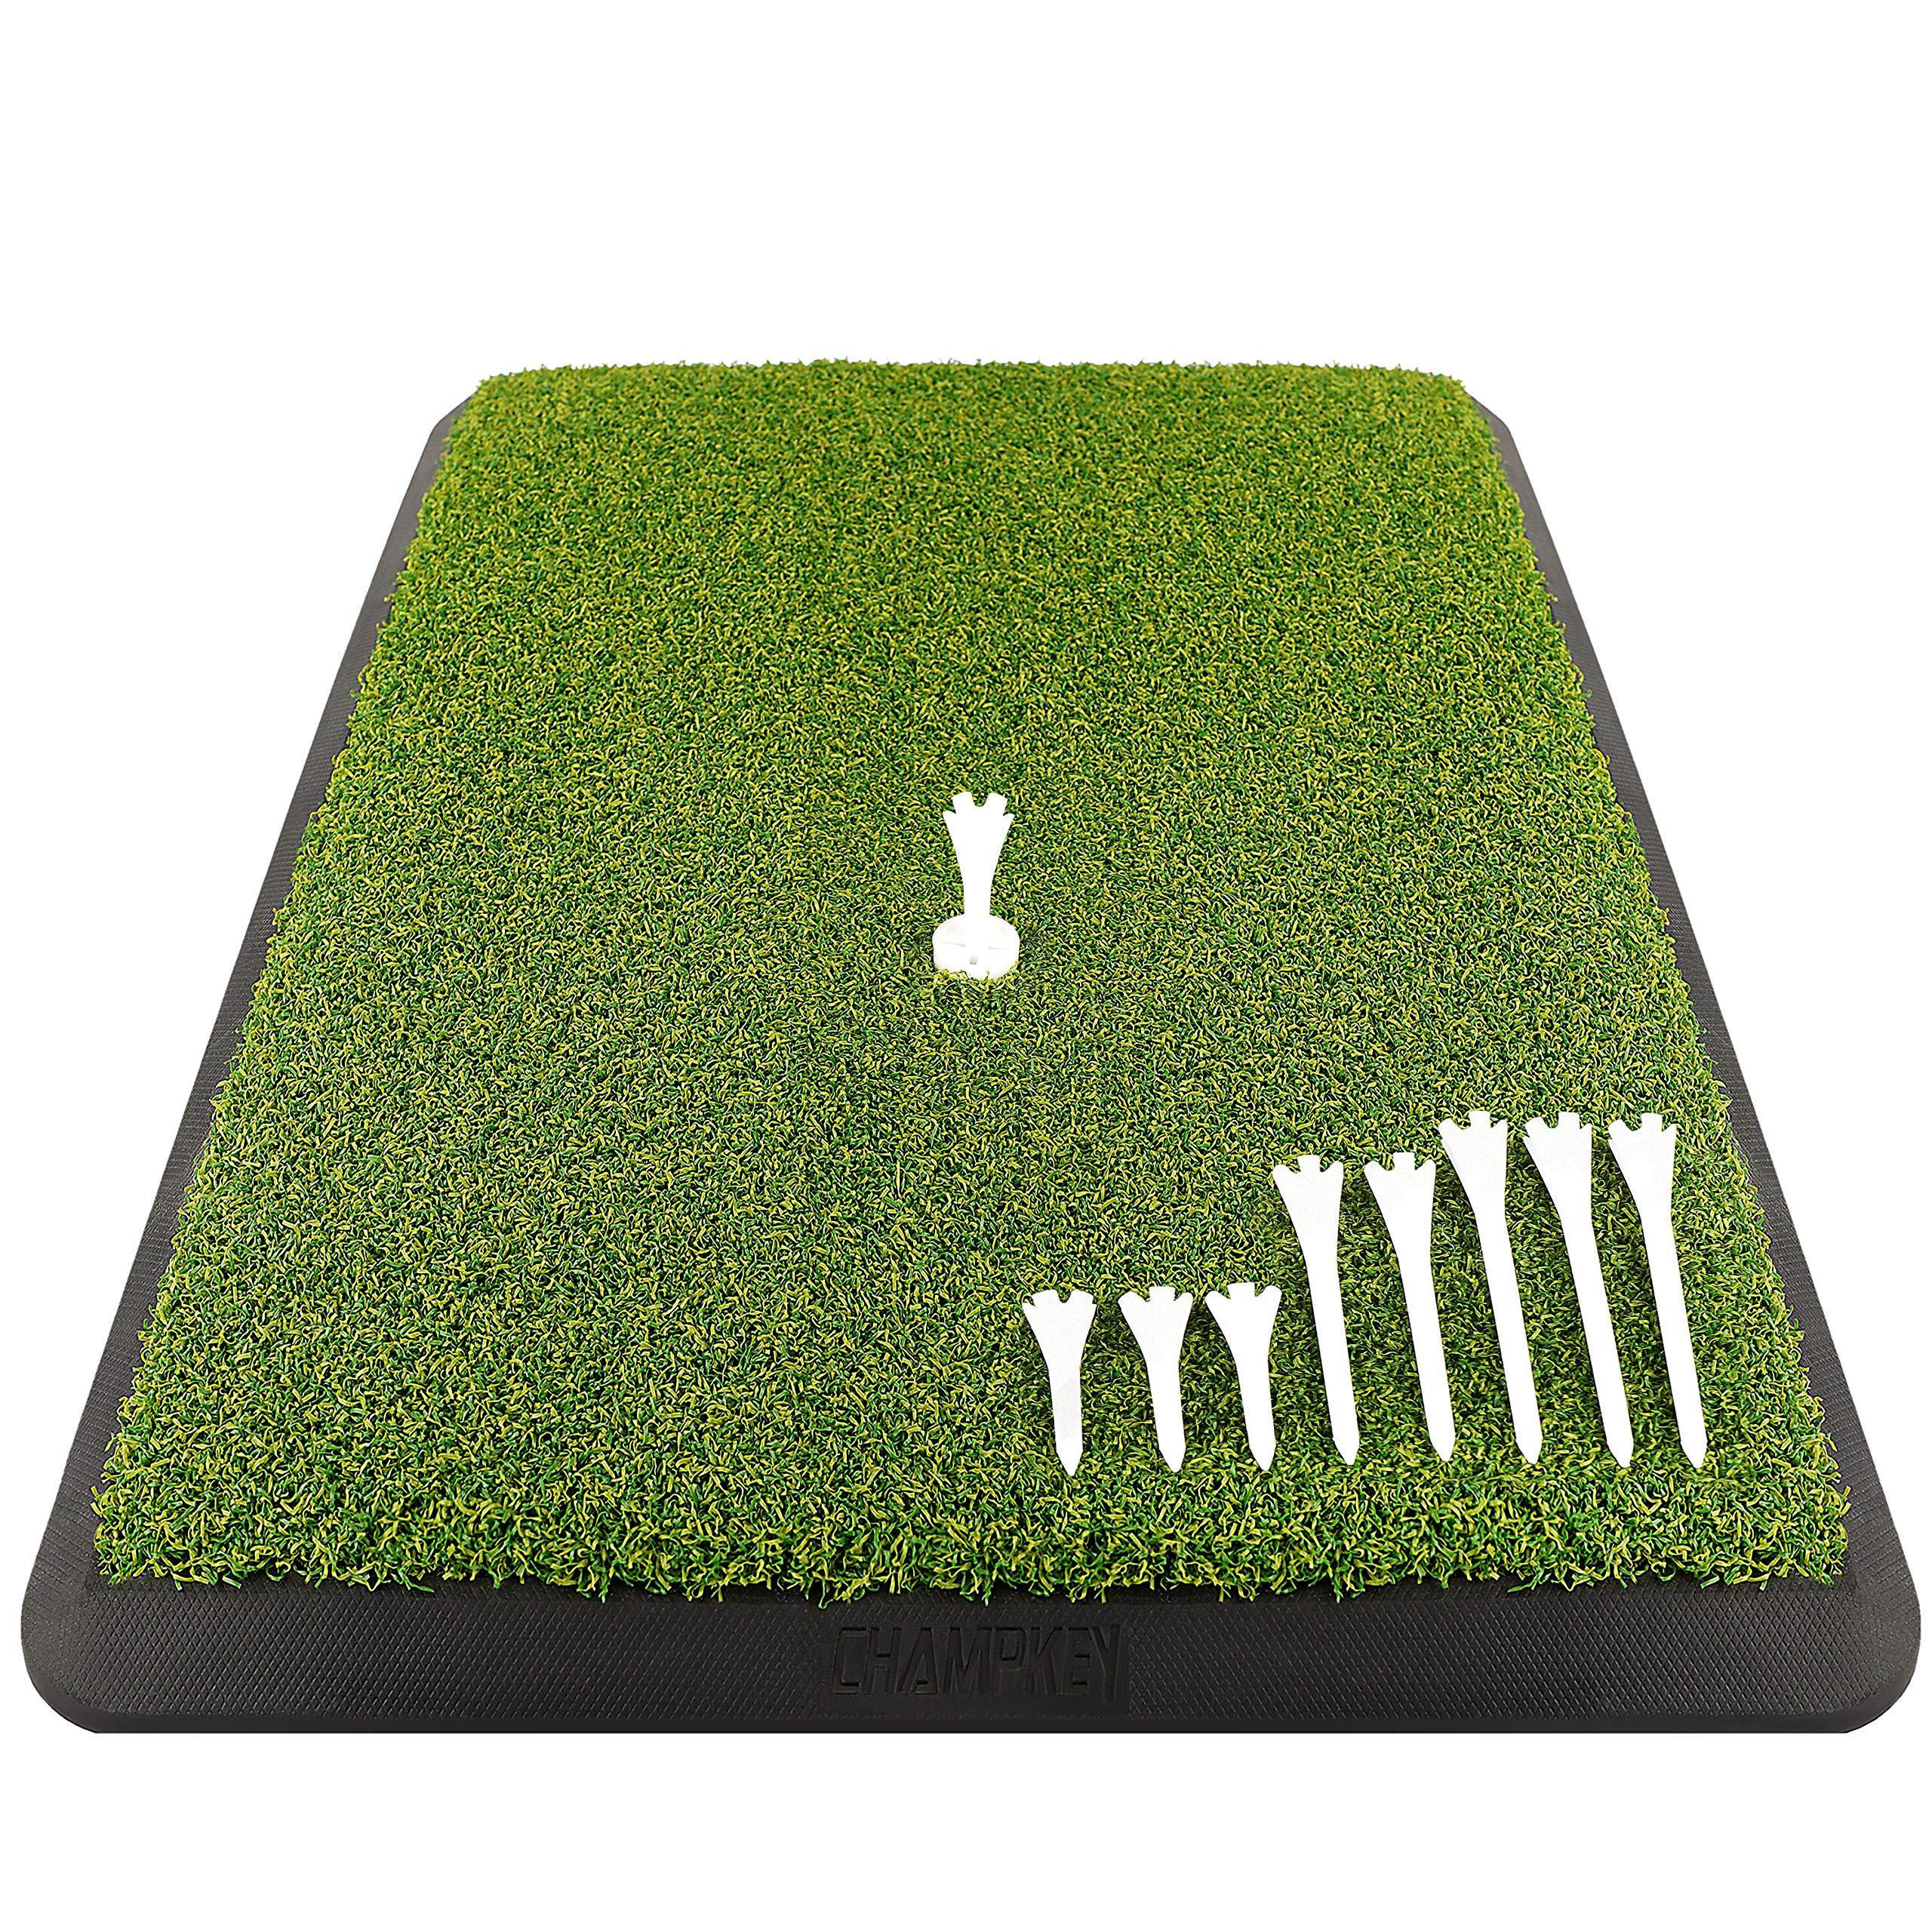 Premium Turf Golf Hitting Mat (9 Golf Tees & 1 Rubber Tee Included) - The Golfing Eagles